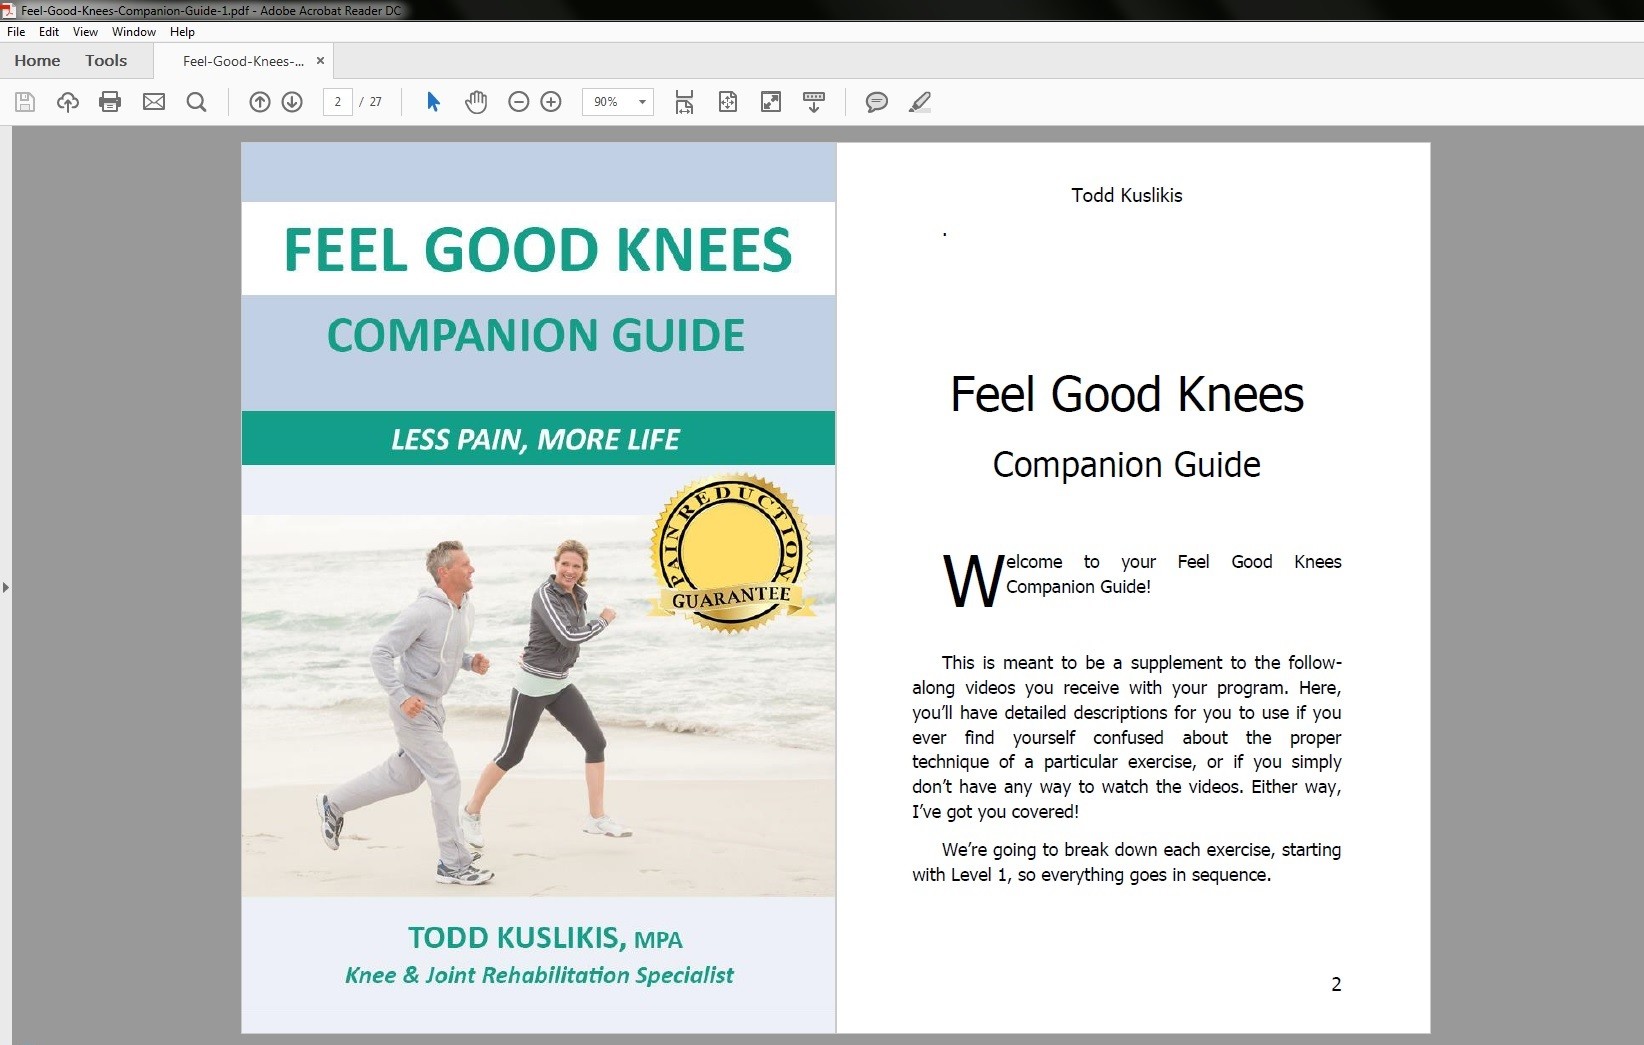 Feel Good Knees Table of Contents